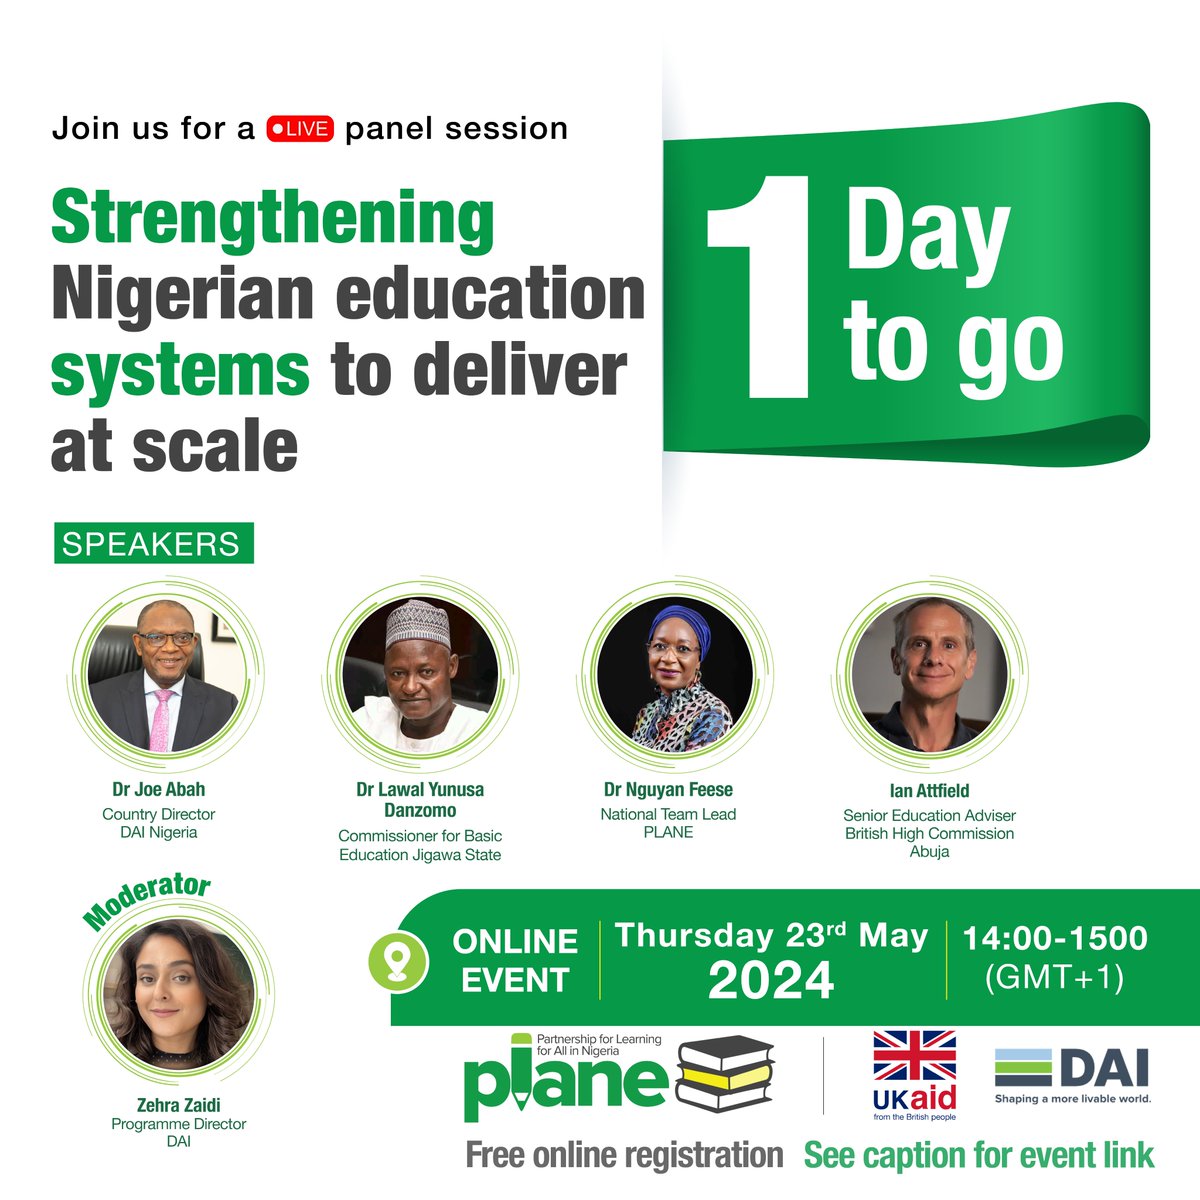 Just 1 day left! To attend our live panel session this Thursday at 2pm, you can still register here:🔗bit.ly/3QHOzNO. Hear experts discuss how systems strengthening in #Nigeria is enhancing access to quality education. Don’t miss out! #EWF2024 #EducationForAll #SDG4